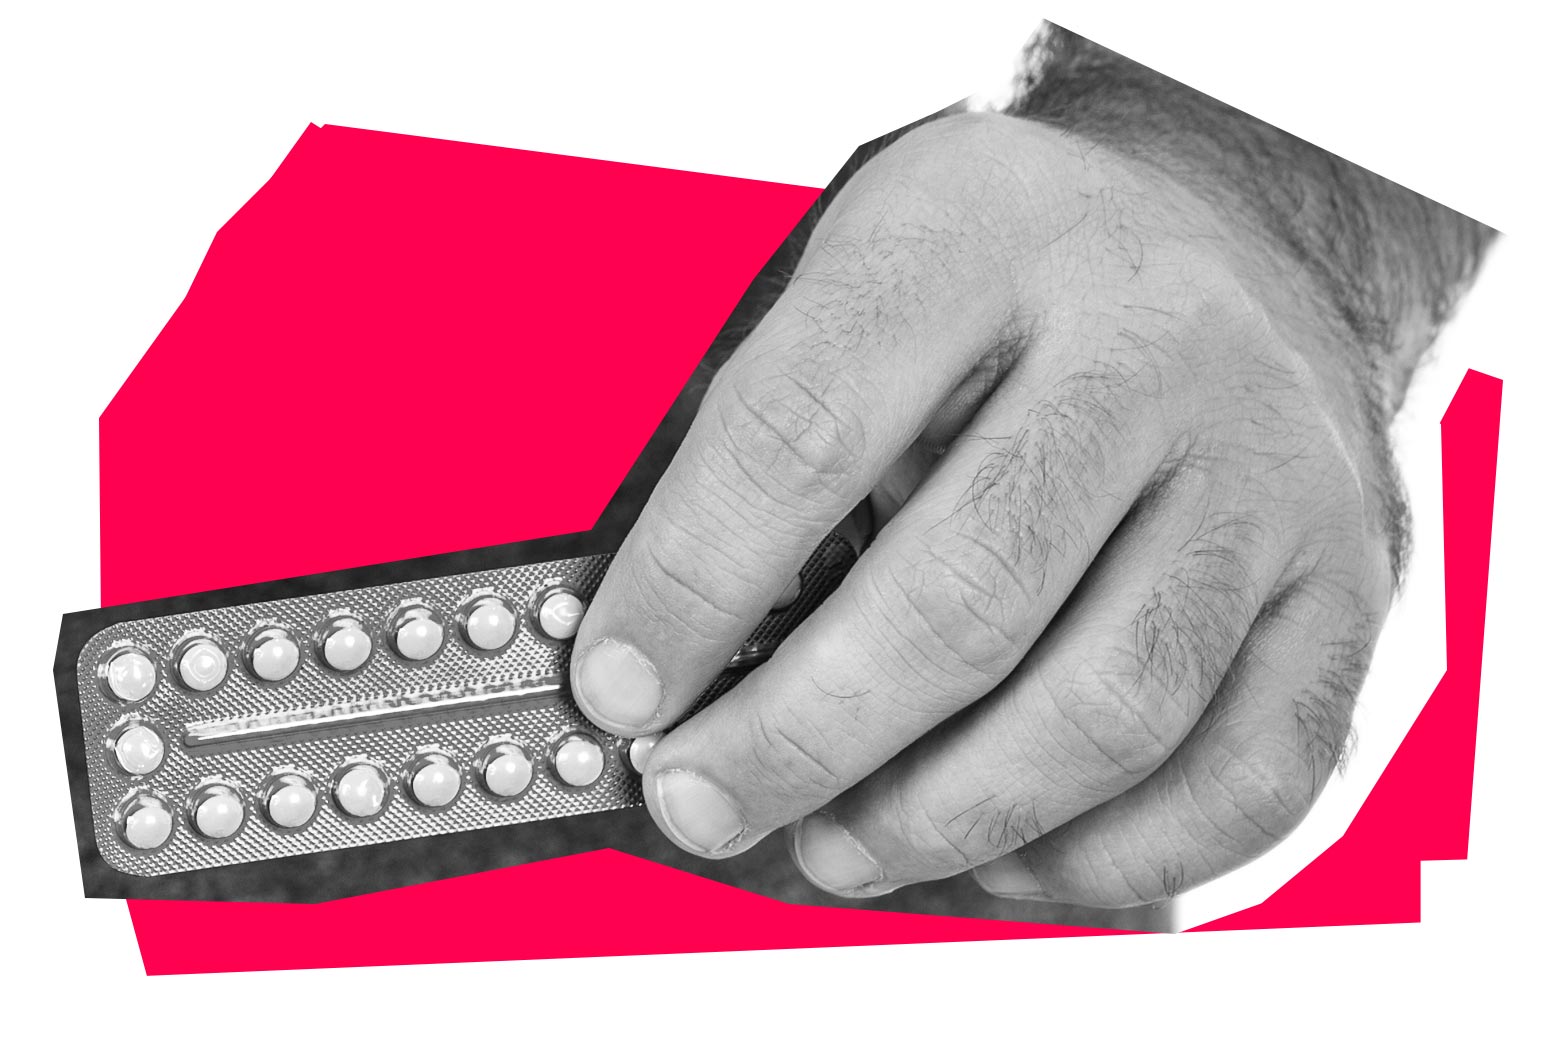 Hand holding a pack of birth control pills